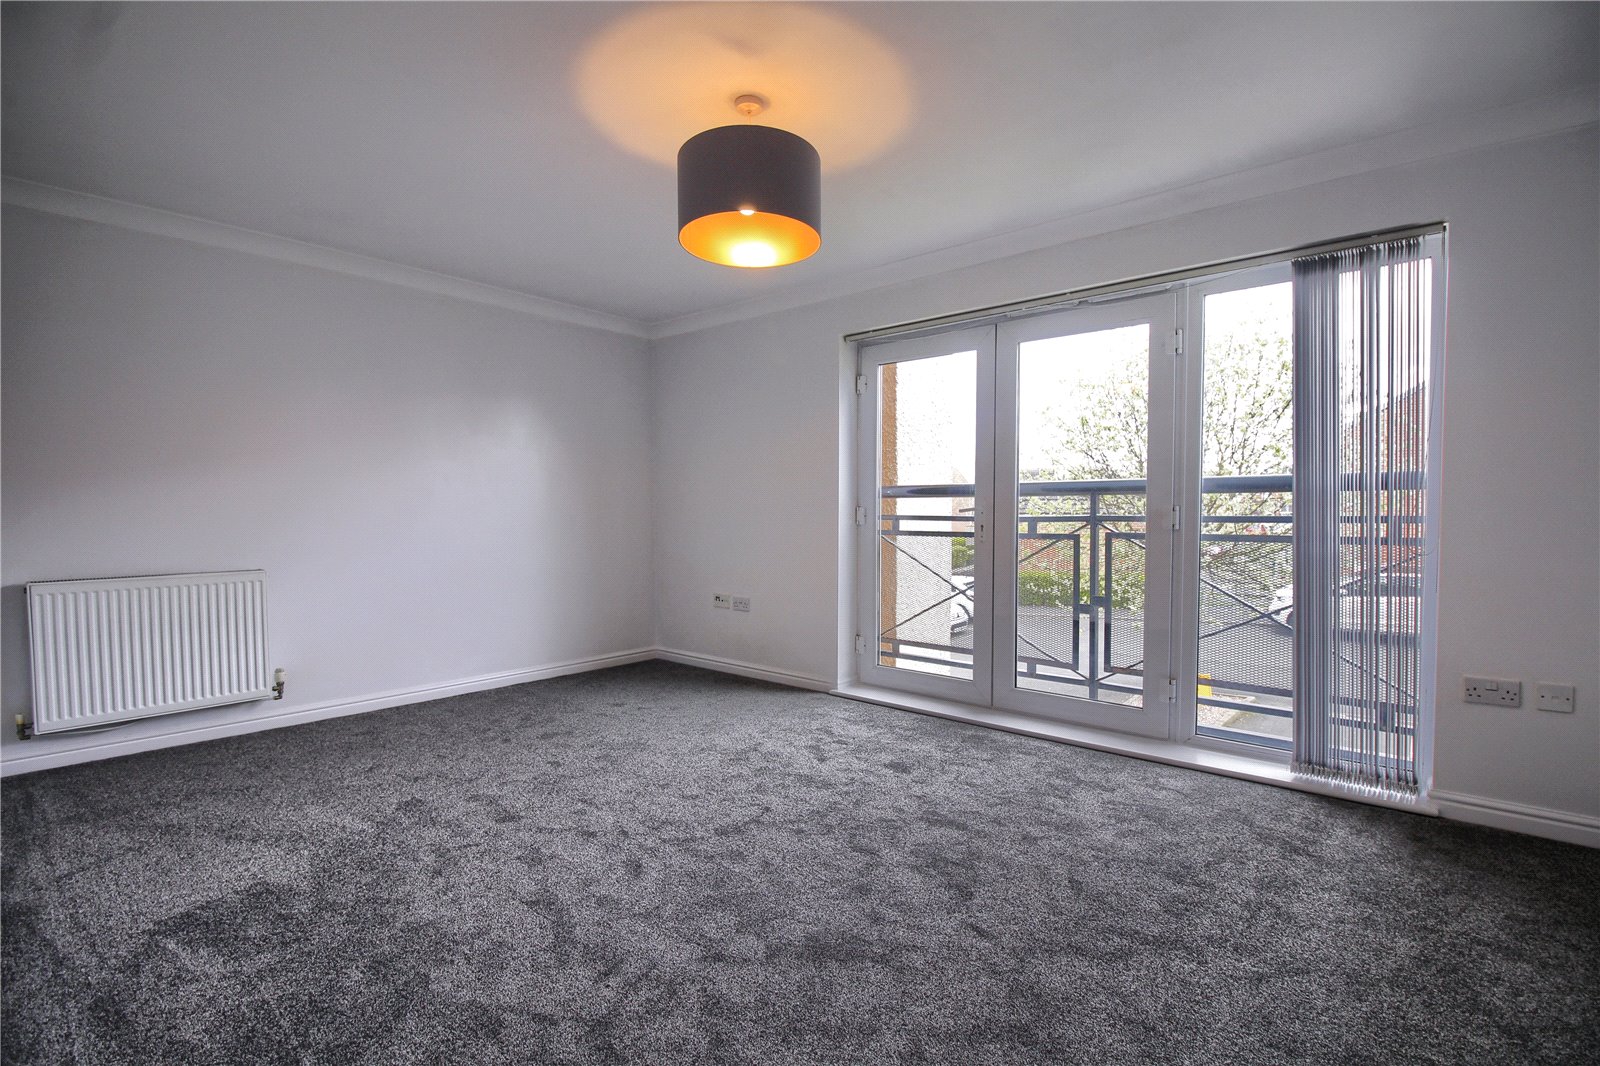 2 bed apartment to rent in Brusselton Court, Stockton-on-Tees  - Property Image 2